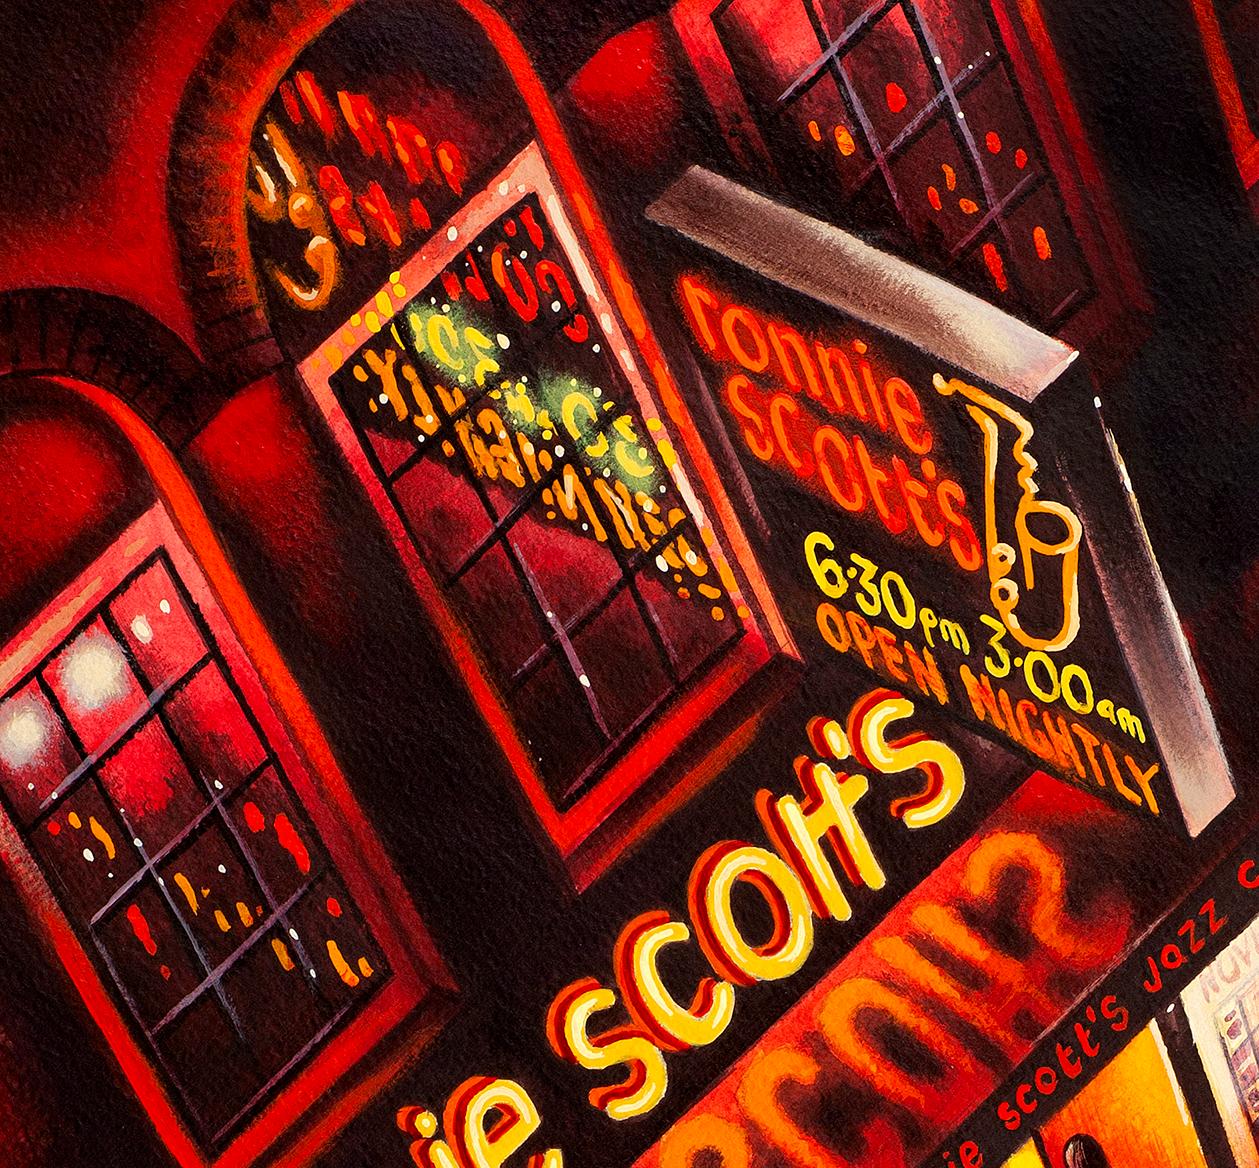 Ronnie Scott's, limited edition art, still-life, cityscape, London - Painting by John Duffin